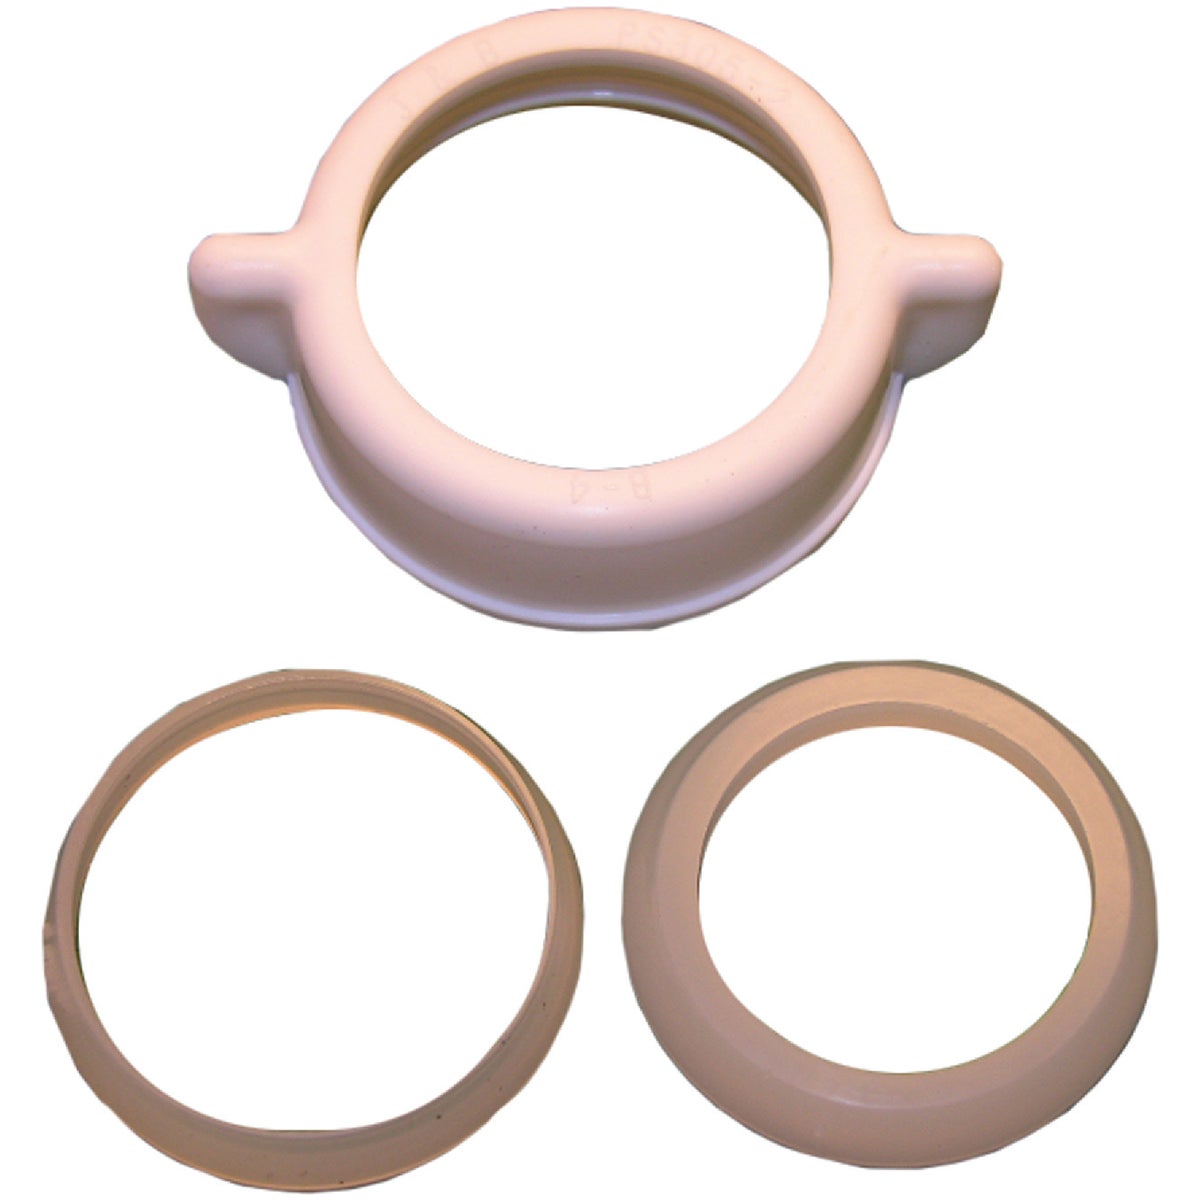 Lasco 1-1/2 In. x 1-1/4 In. White Plastic Slip Joint Nut and Washer